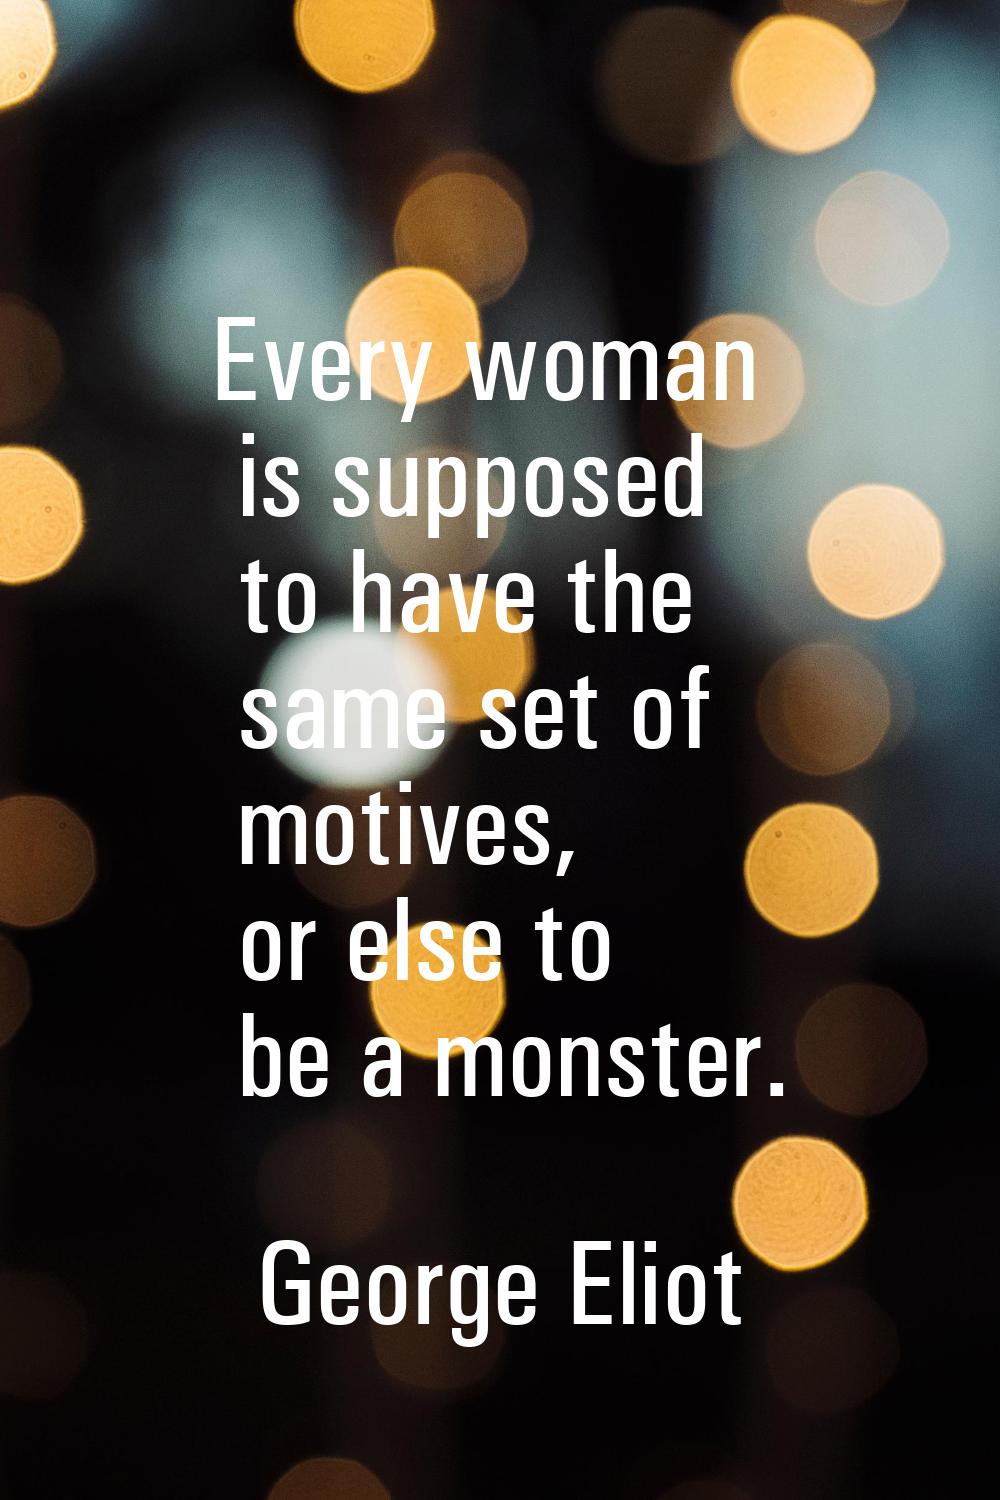 Every woman is supposed to have the same set of motives, or else to be a monster.